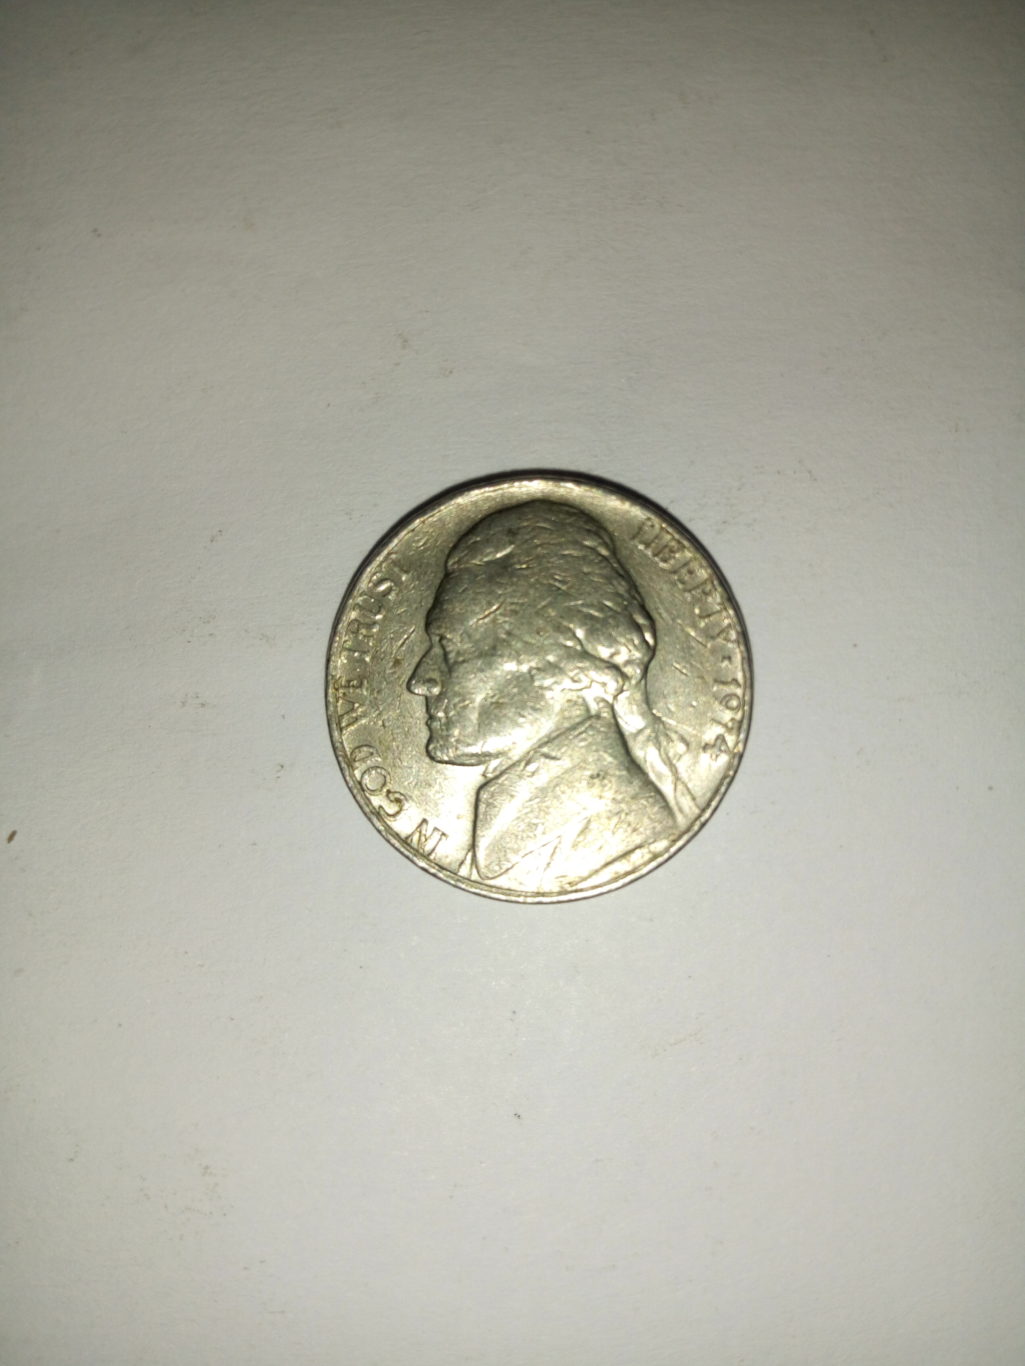 1974_ united states of America 5 cents